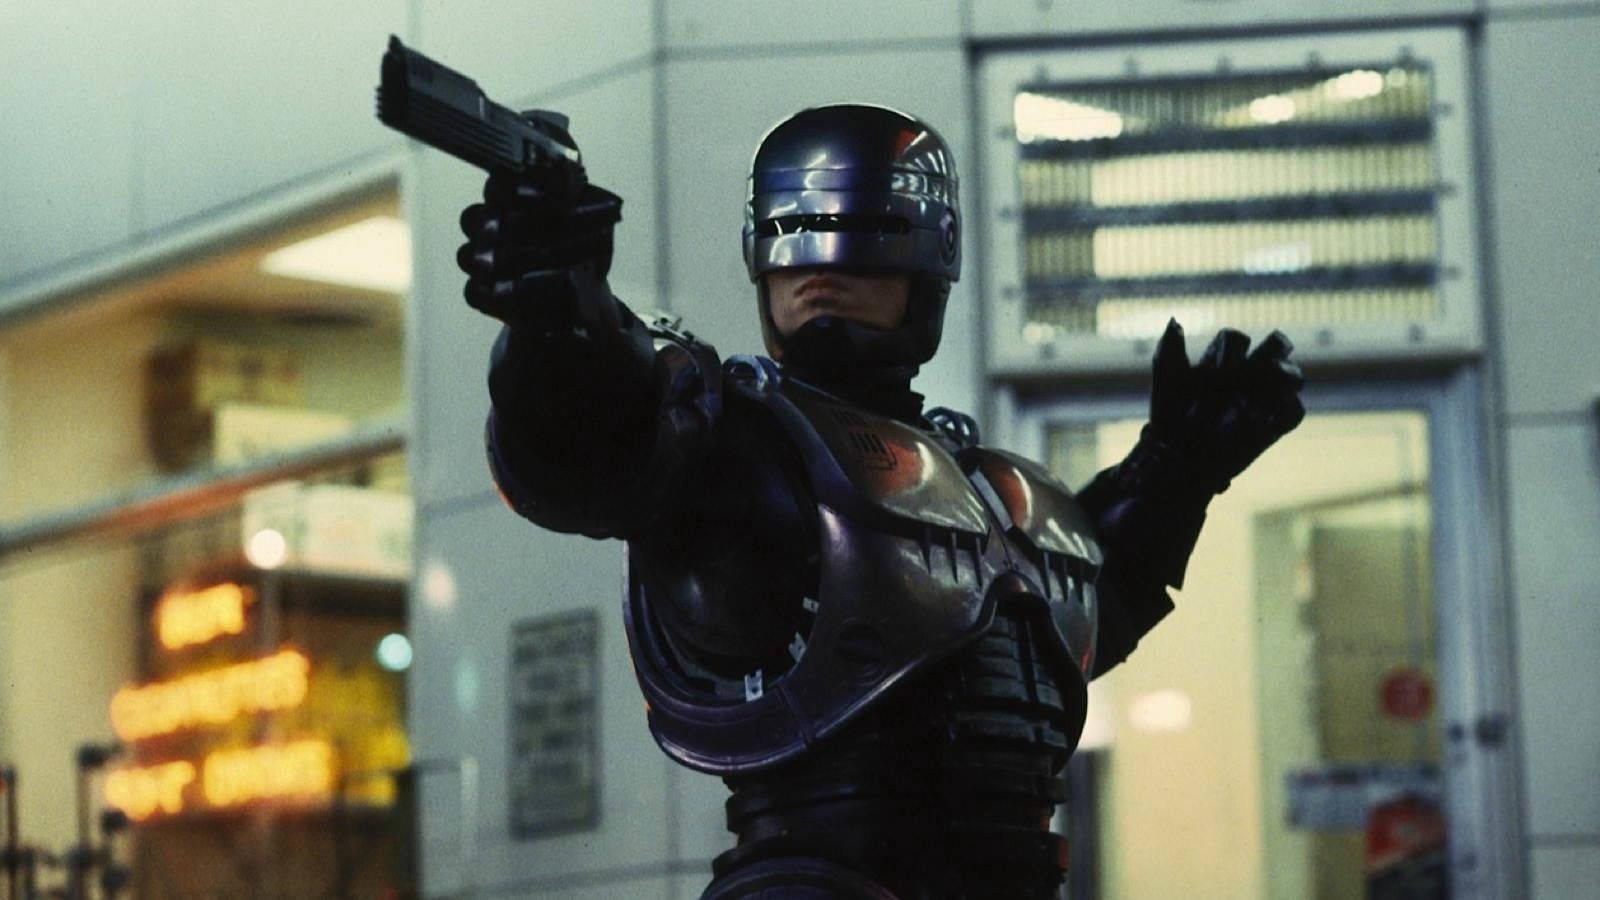 I Watched All Three RoboCop Movies In a Row Because Nothing Matters Anyway.